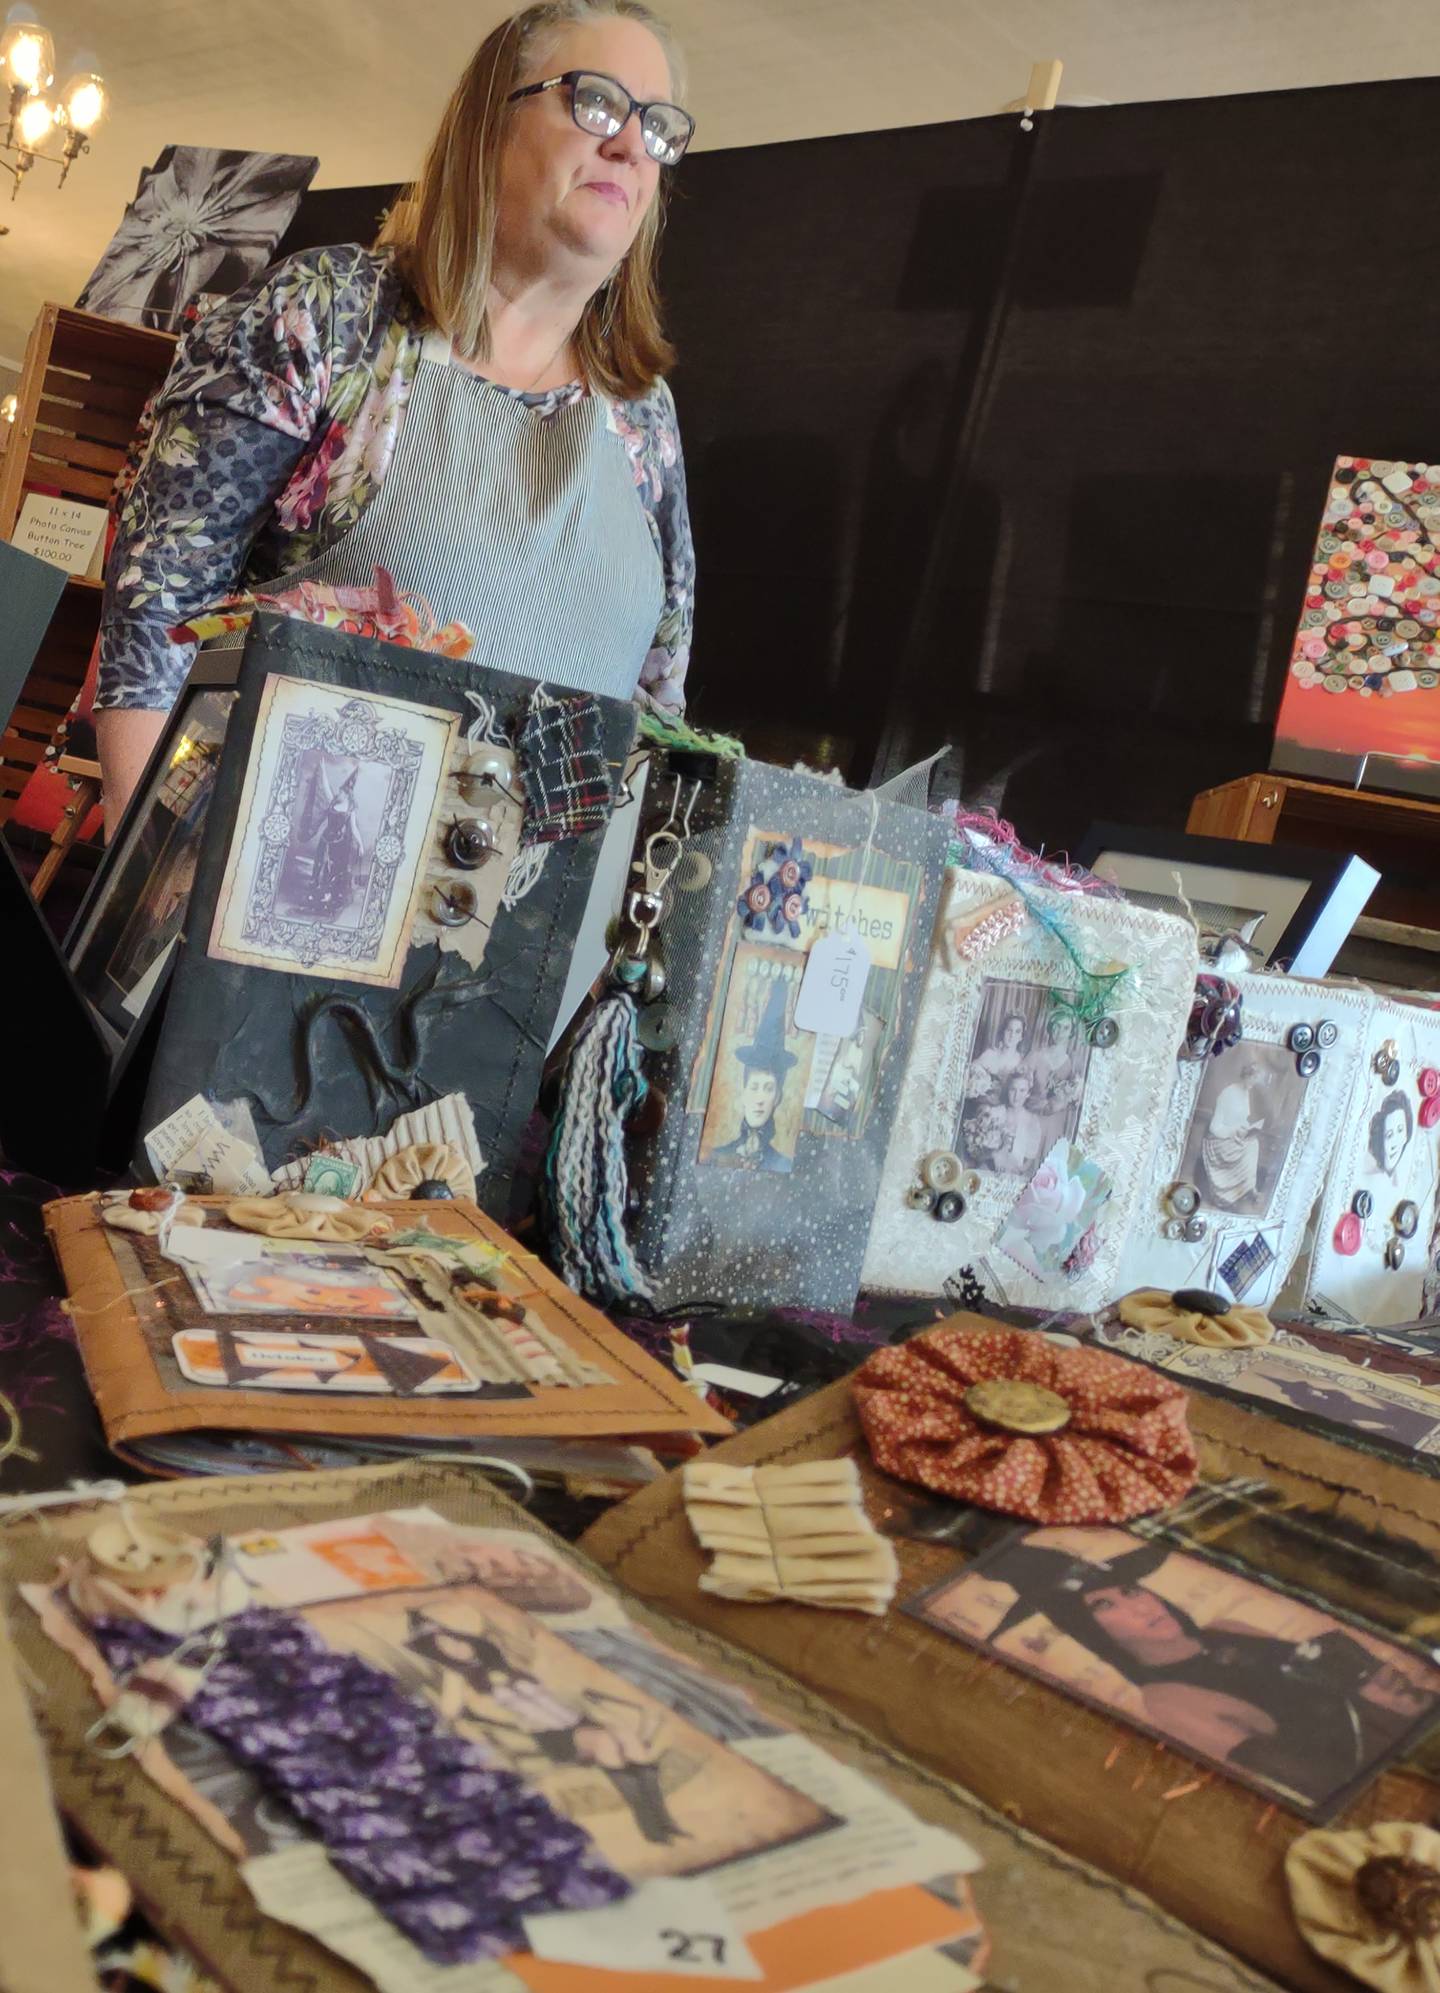 Nancy Nieslawski of La Salle listens to a customer browsing her custom-crafted journals Saturday, Oct. 22, 2022, during the Witches Day Out market at Pitstick Pavilion in Ottawa.